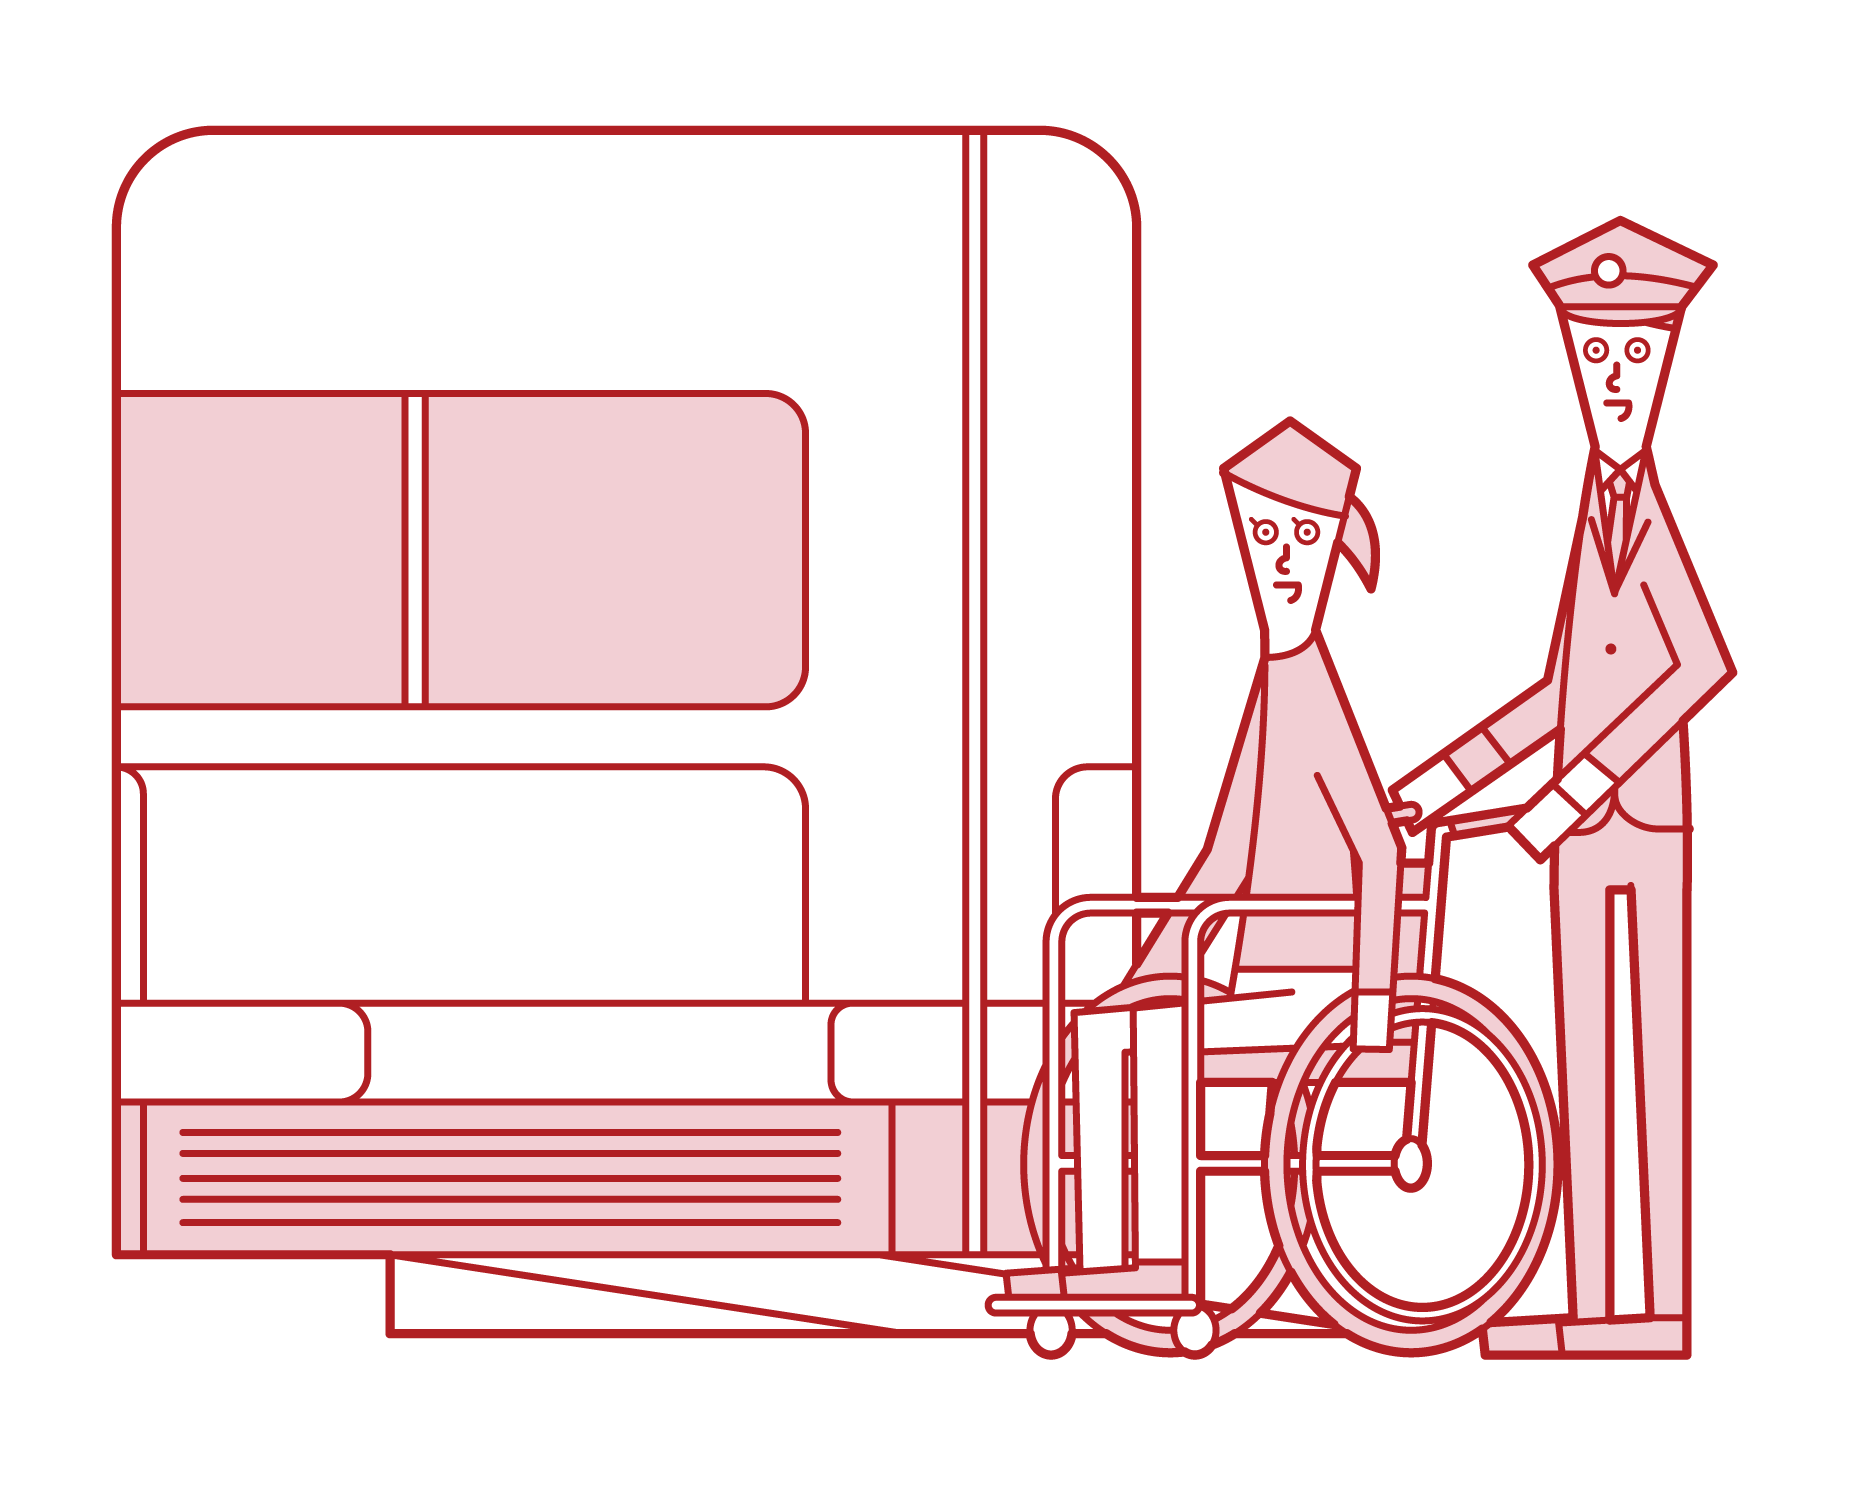 Illustration of a woman riding a wheelchair on a train